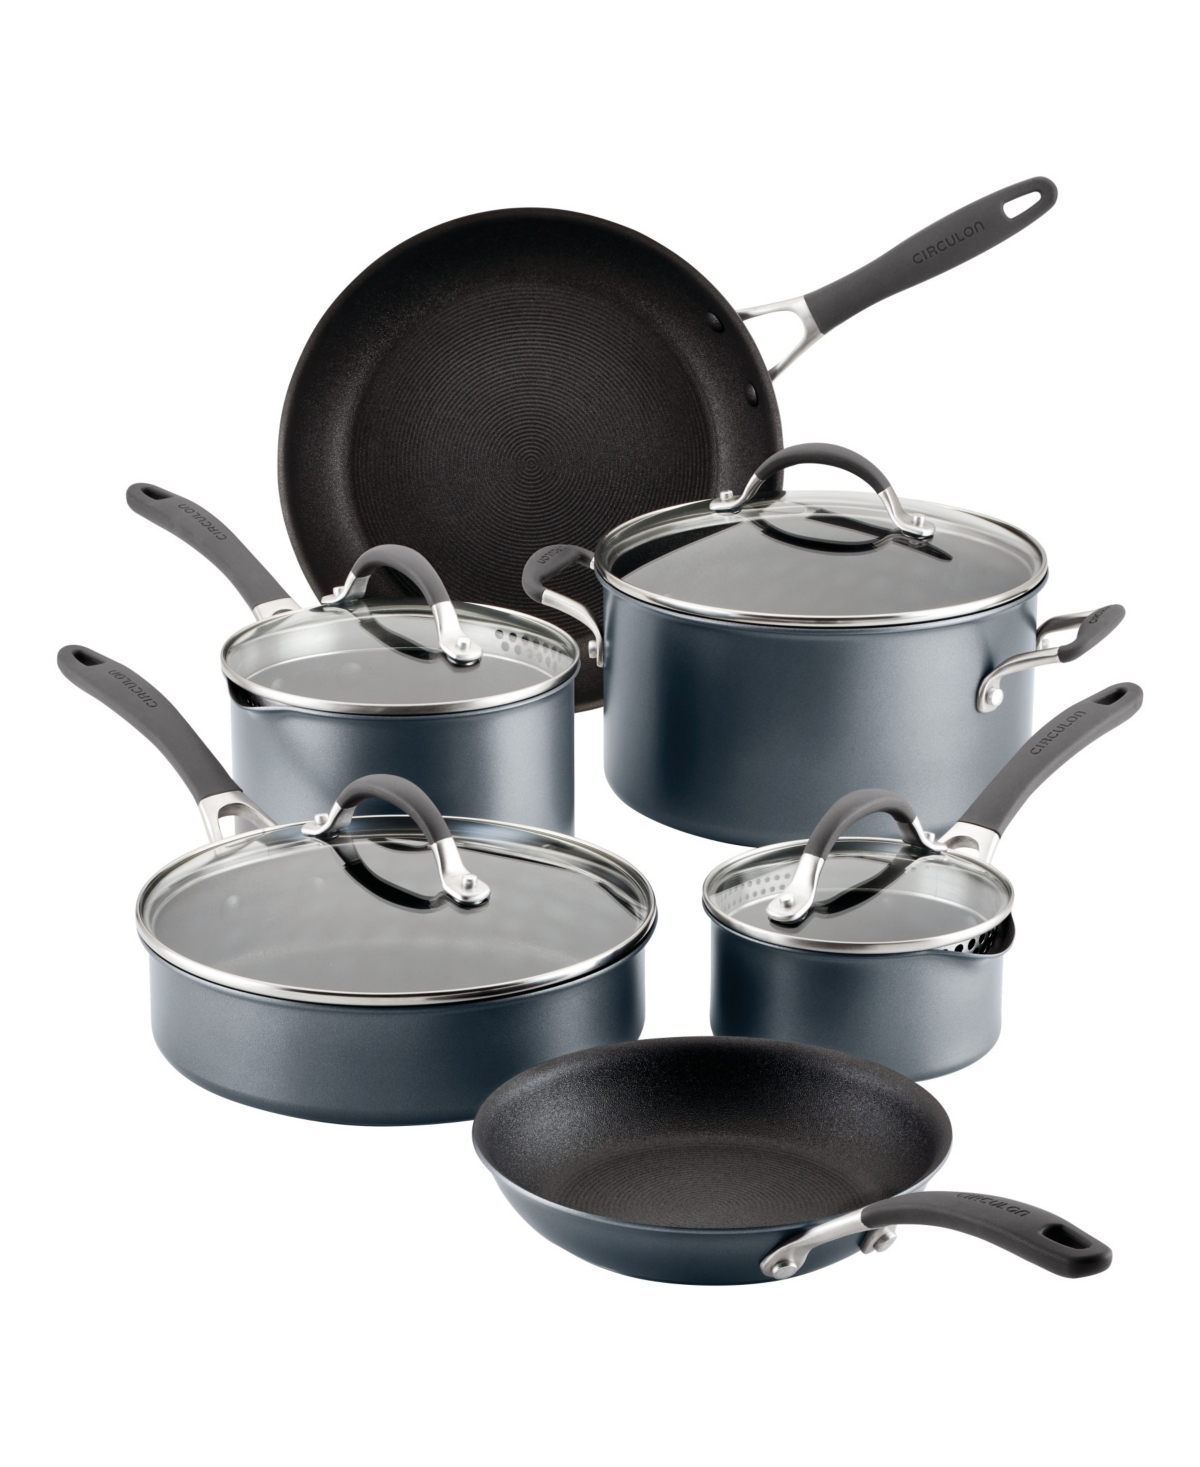 Circulon A1 Series With Scratchdefense Technology Aluminum 10 Piece Nonstick Induction Pots And Pans Cookware In Graphite